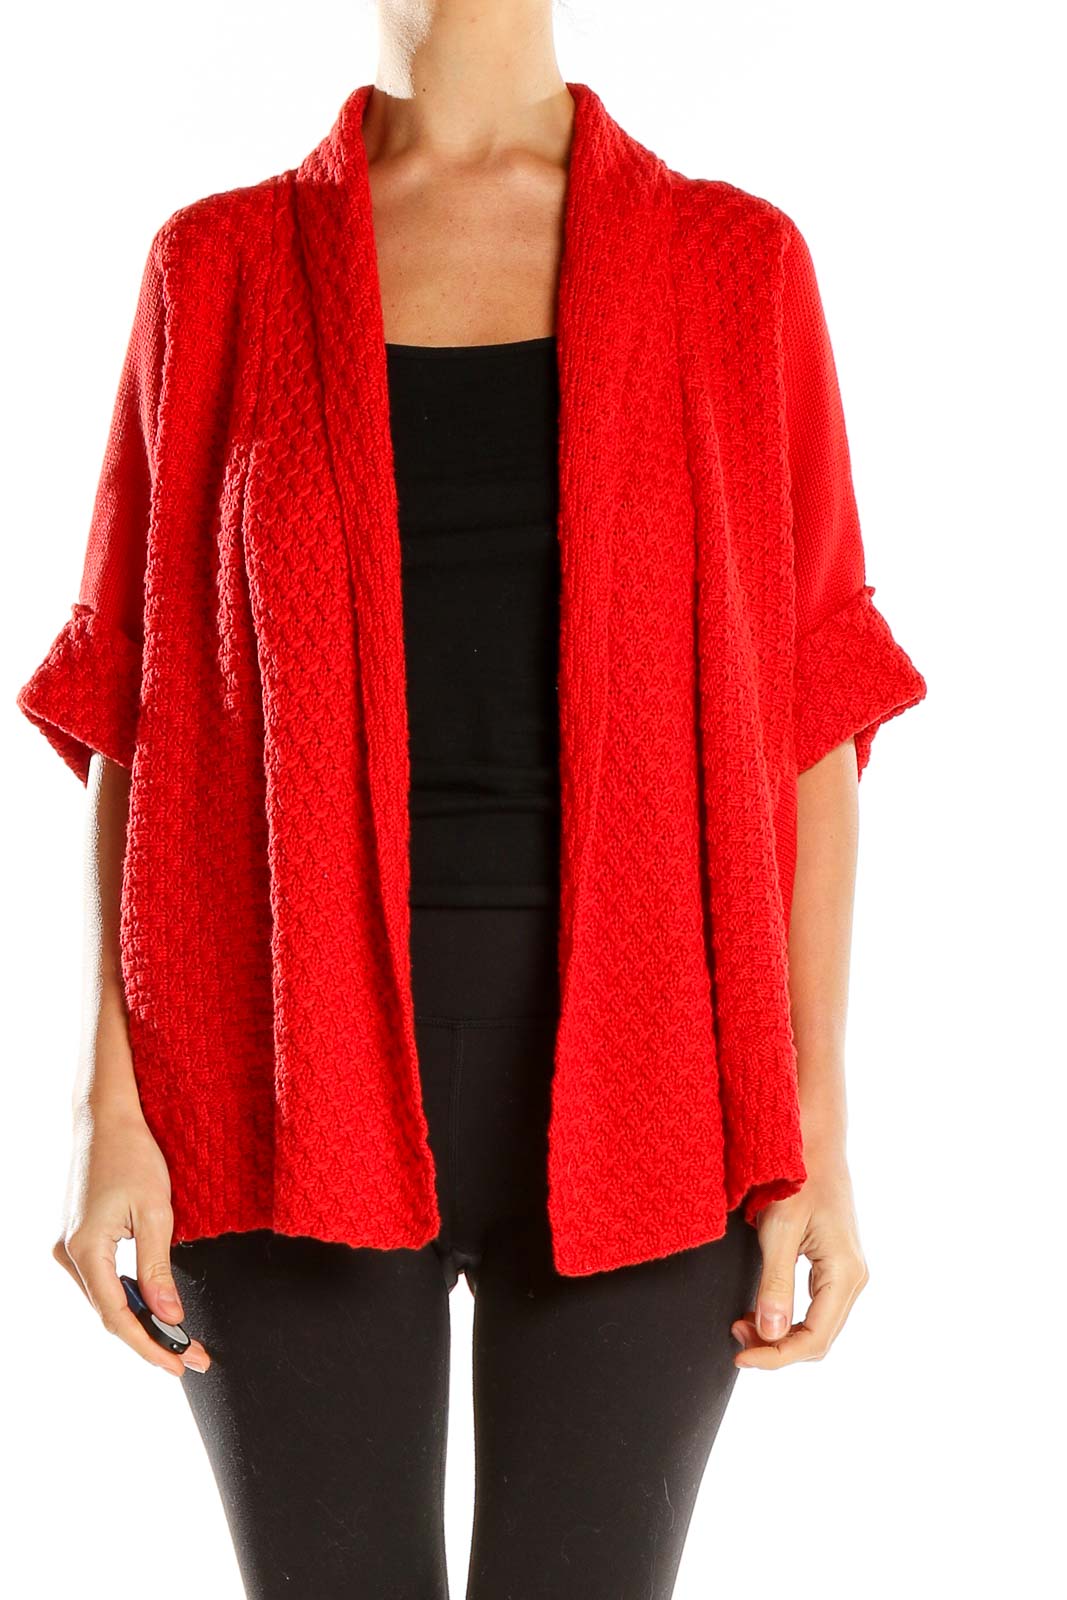 Red Short Sleeve Cardigan Front